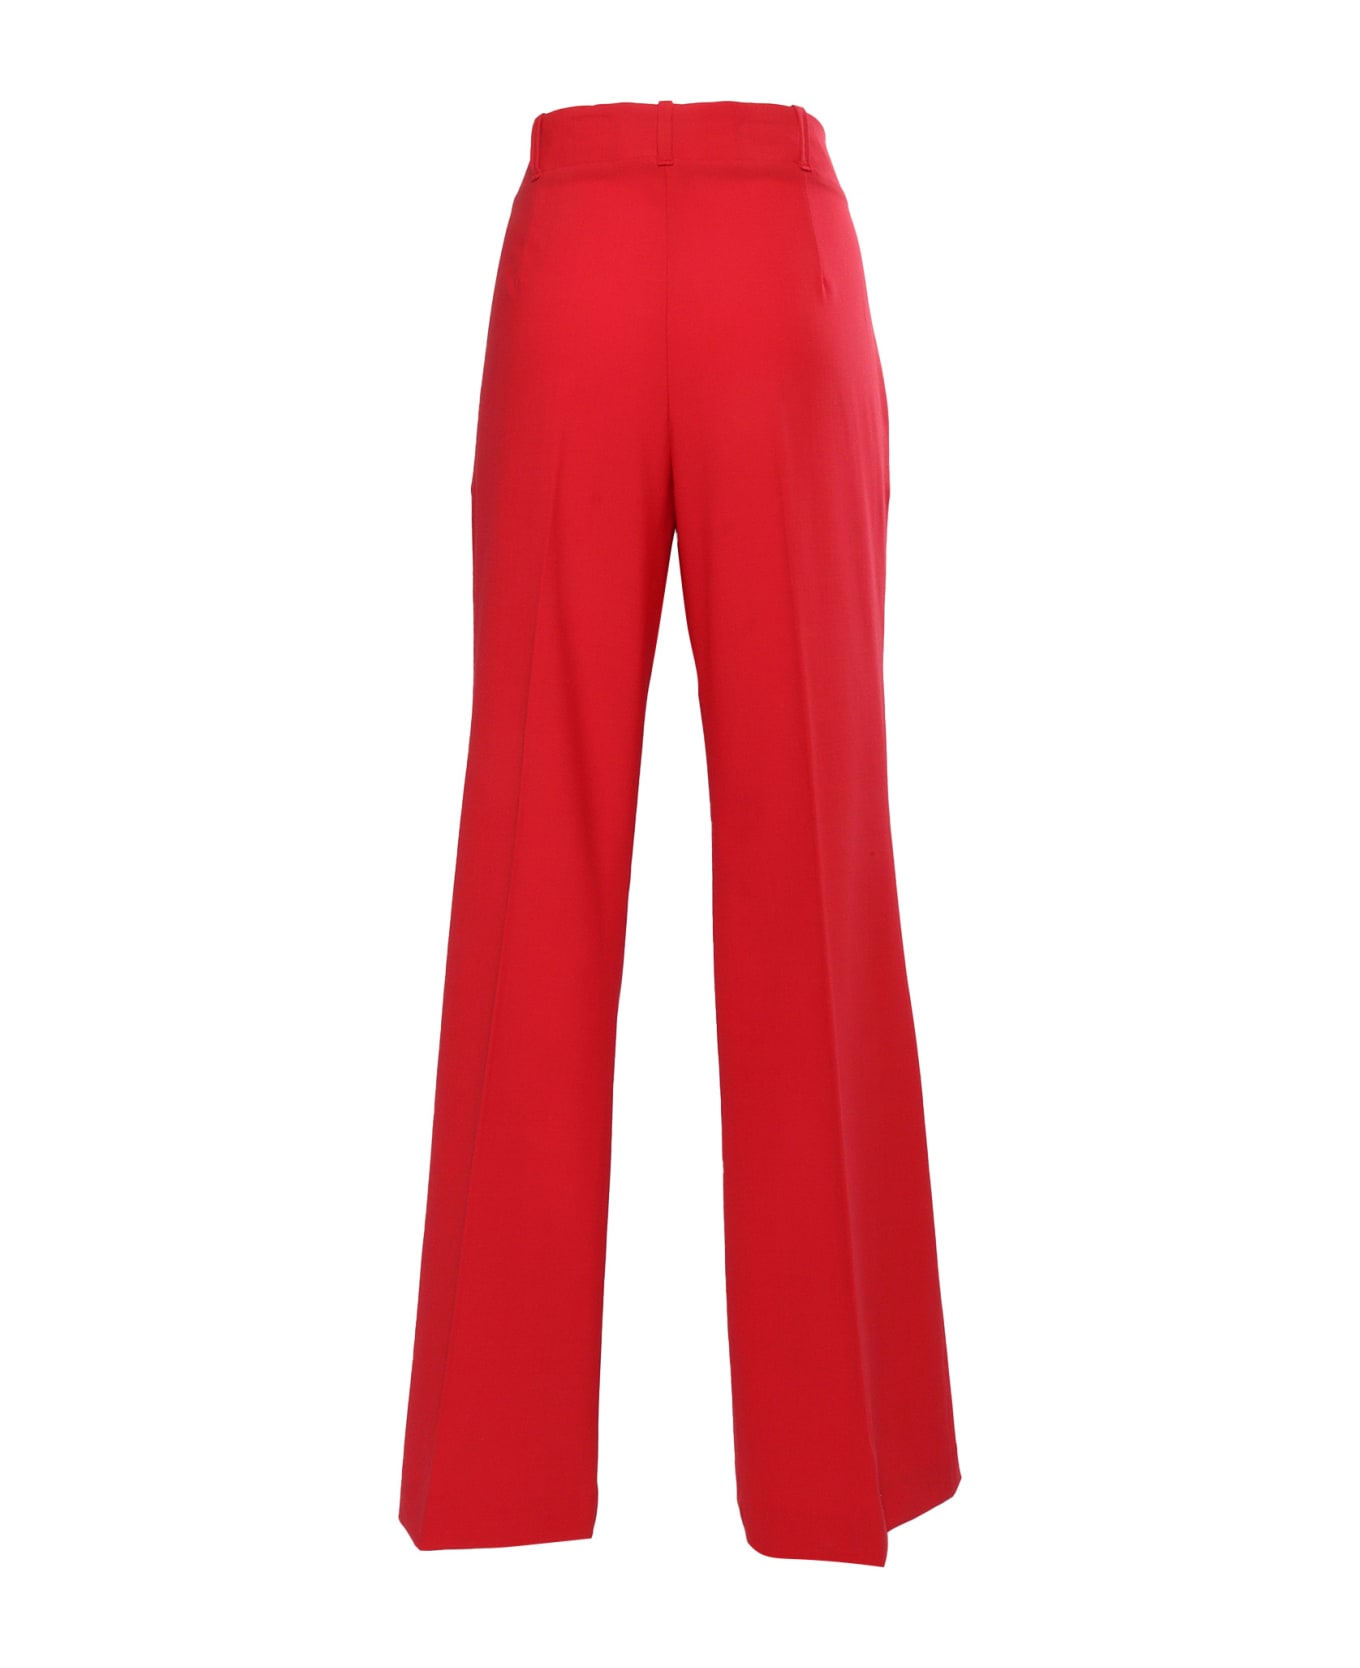 Ballantyne Red Flared Trousers - RED